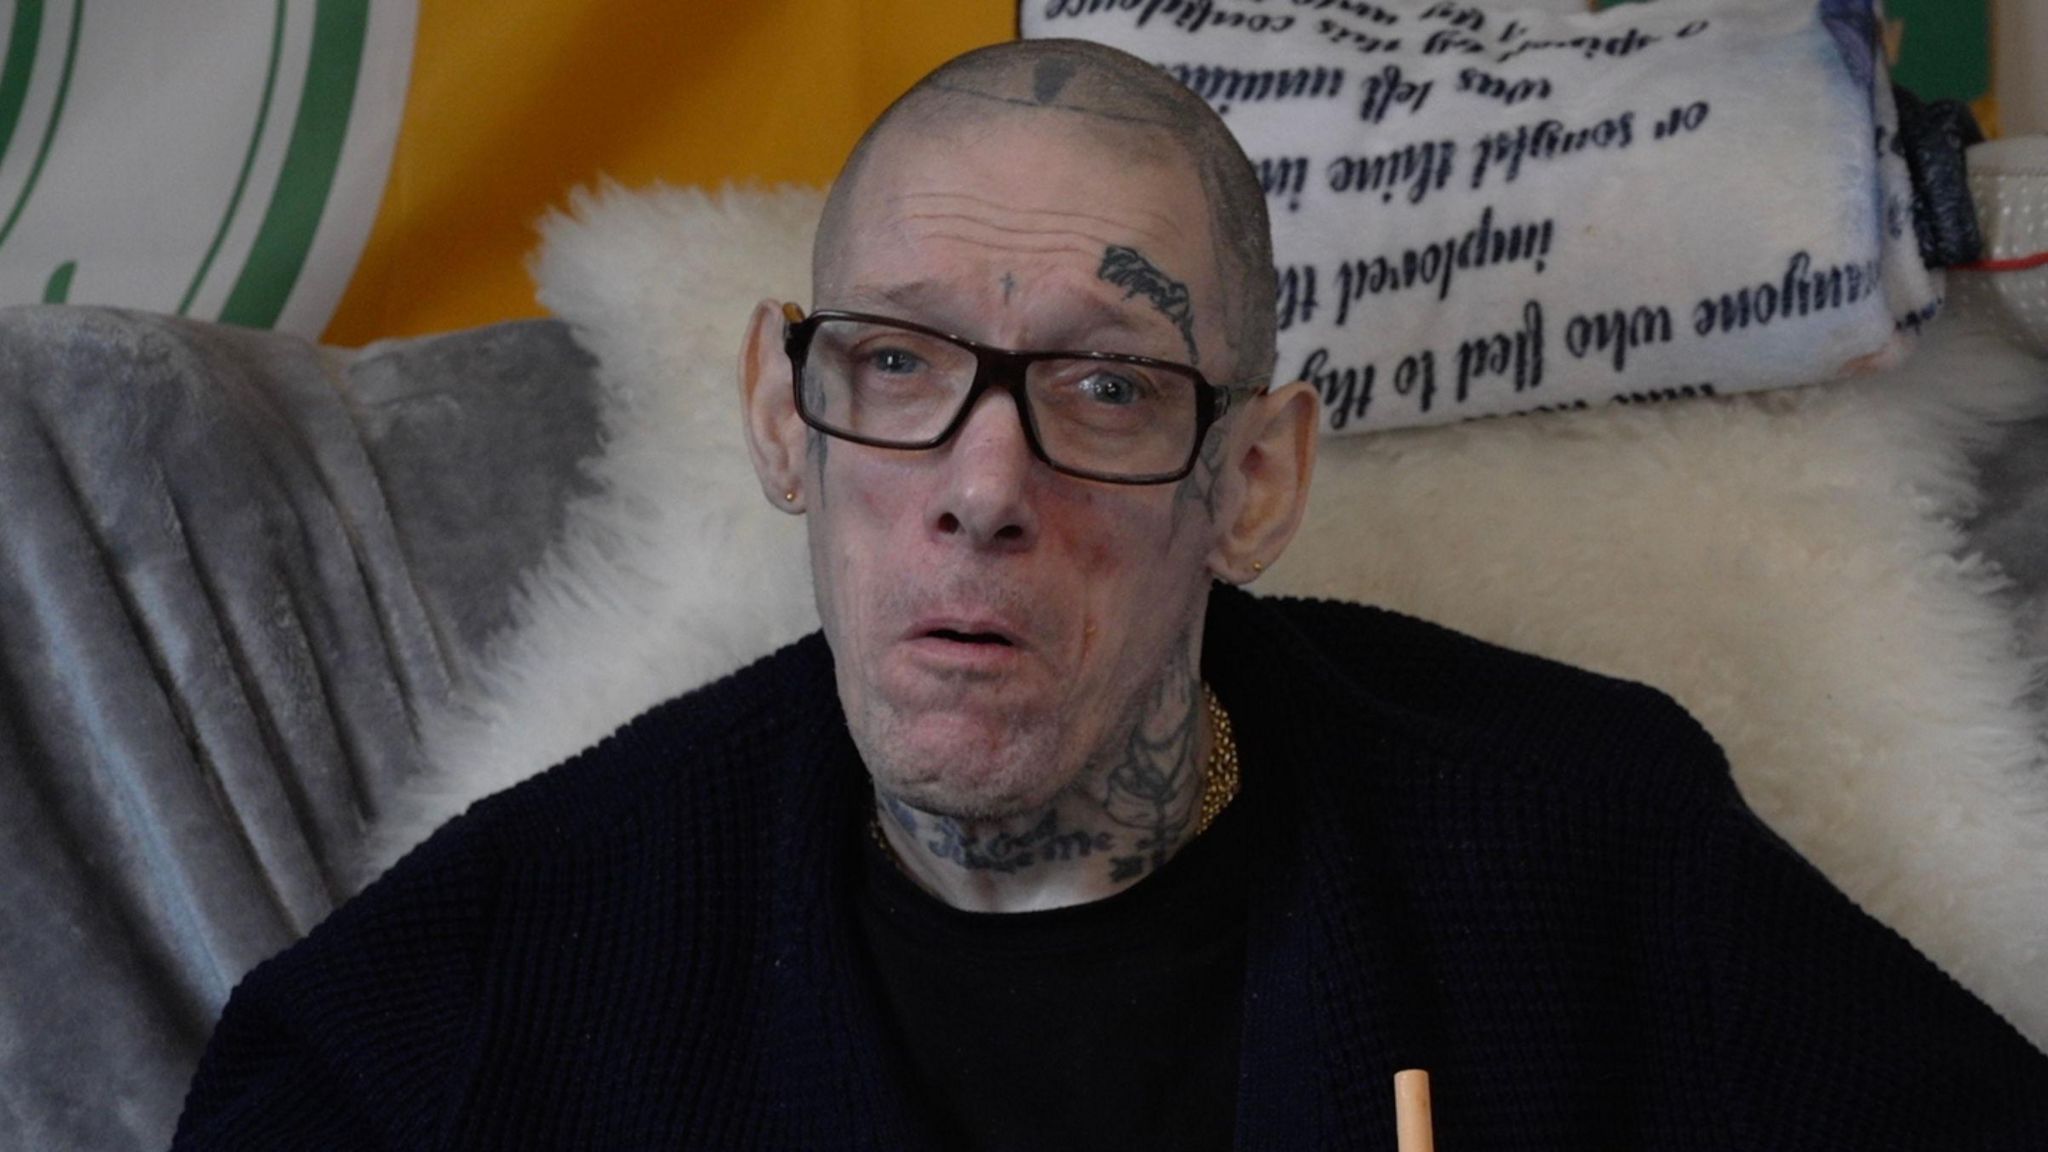 Sam Brackenbury faces the camera wearing a black jumper and black rimmed glasses. He has face and neck tattoos and is sitting in front of a sheepskin throw on a chair. 